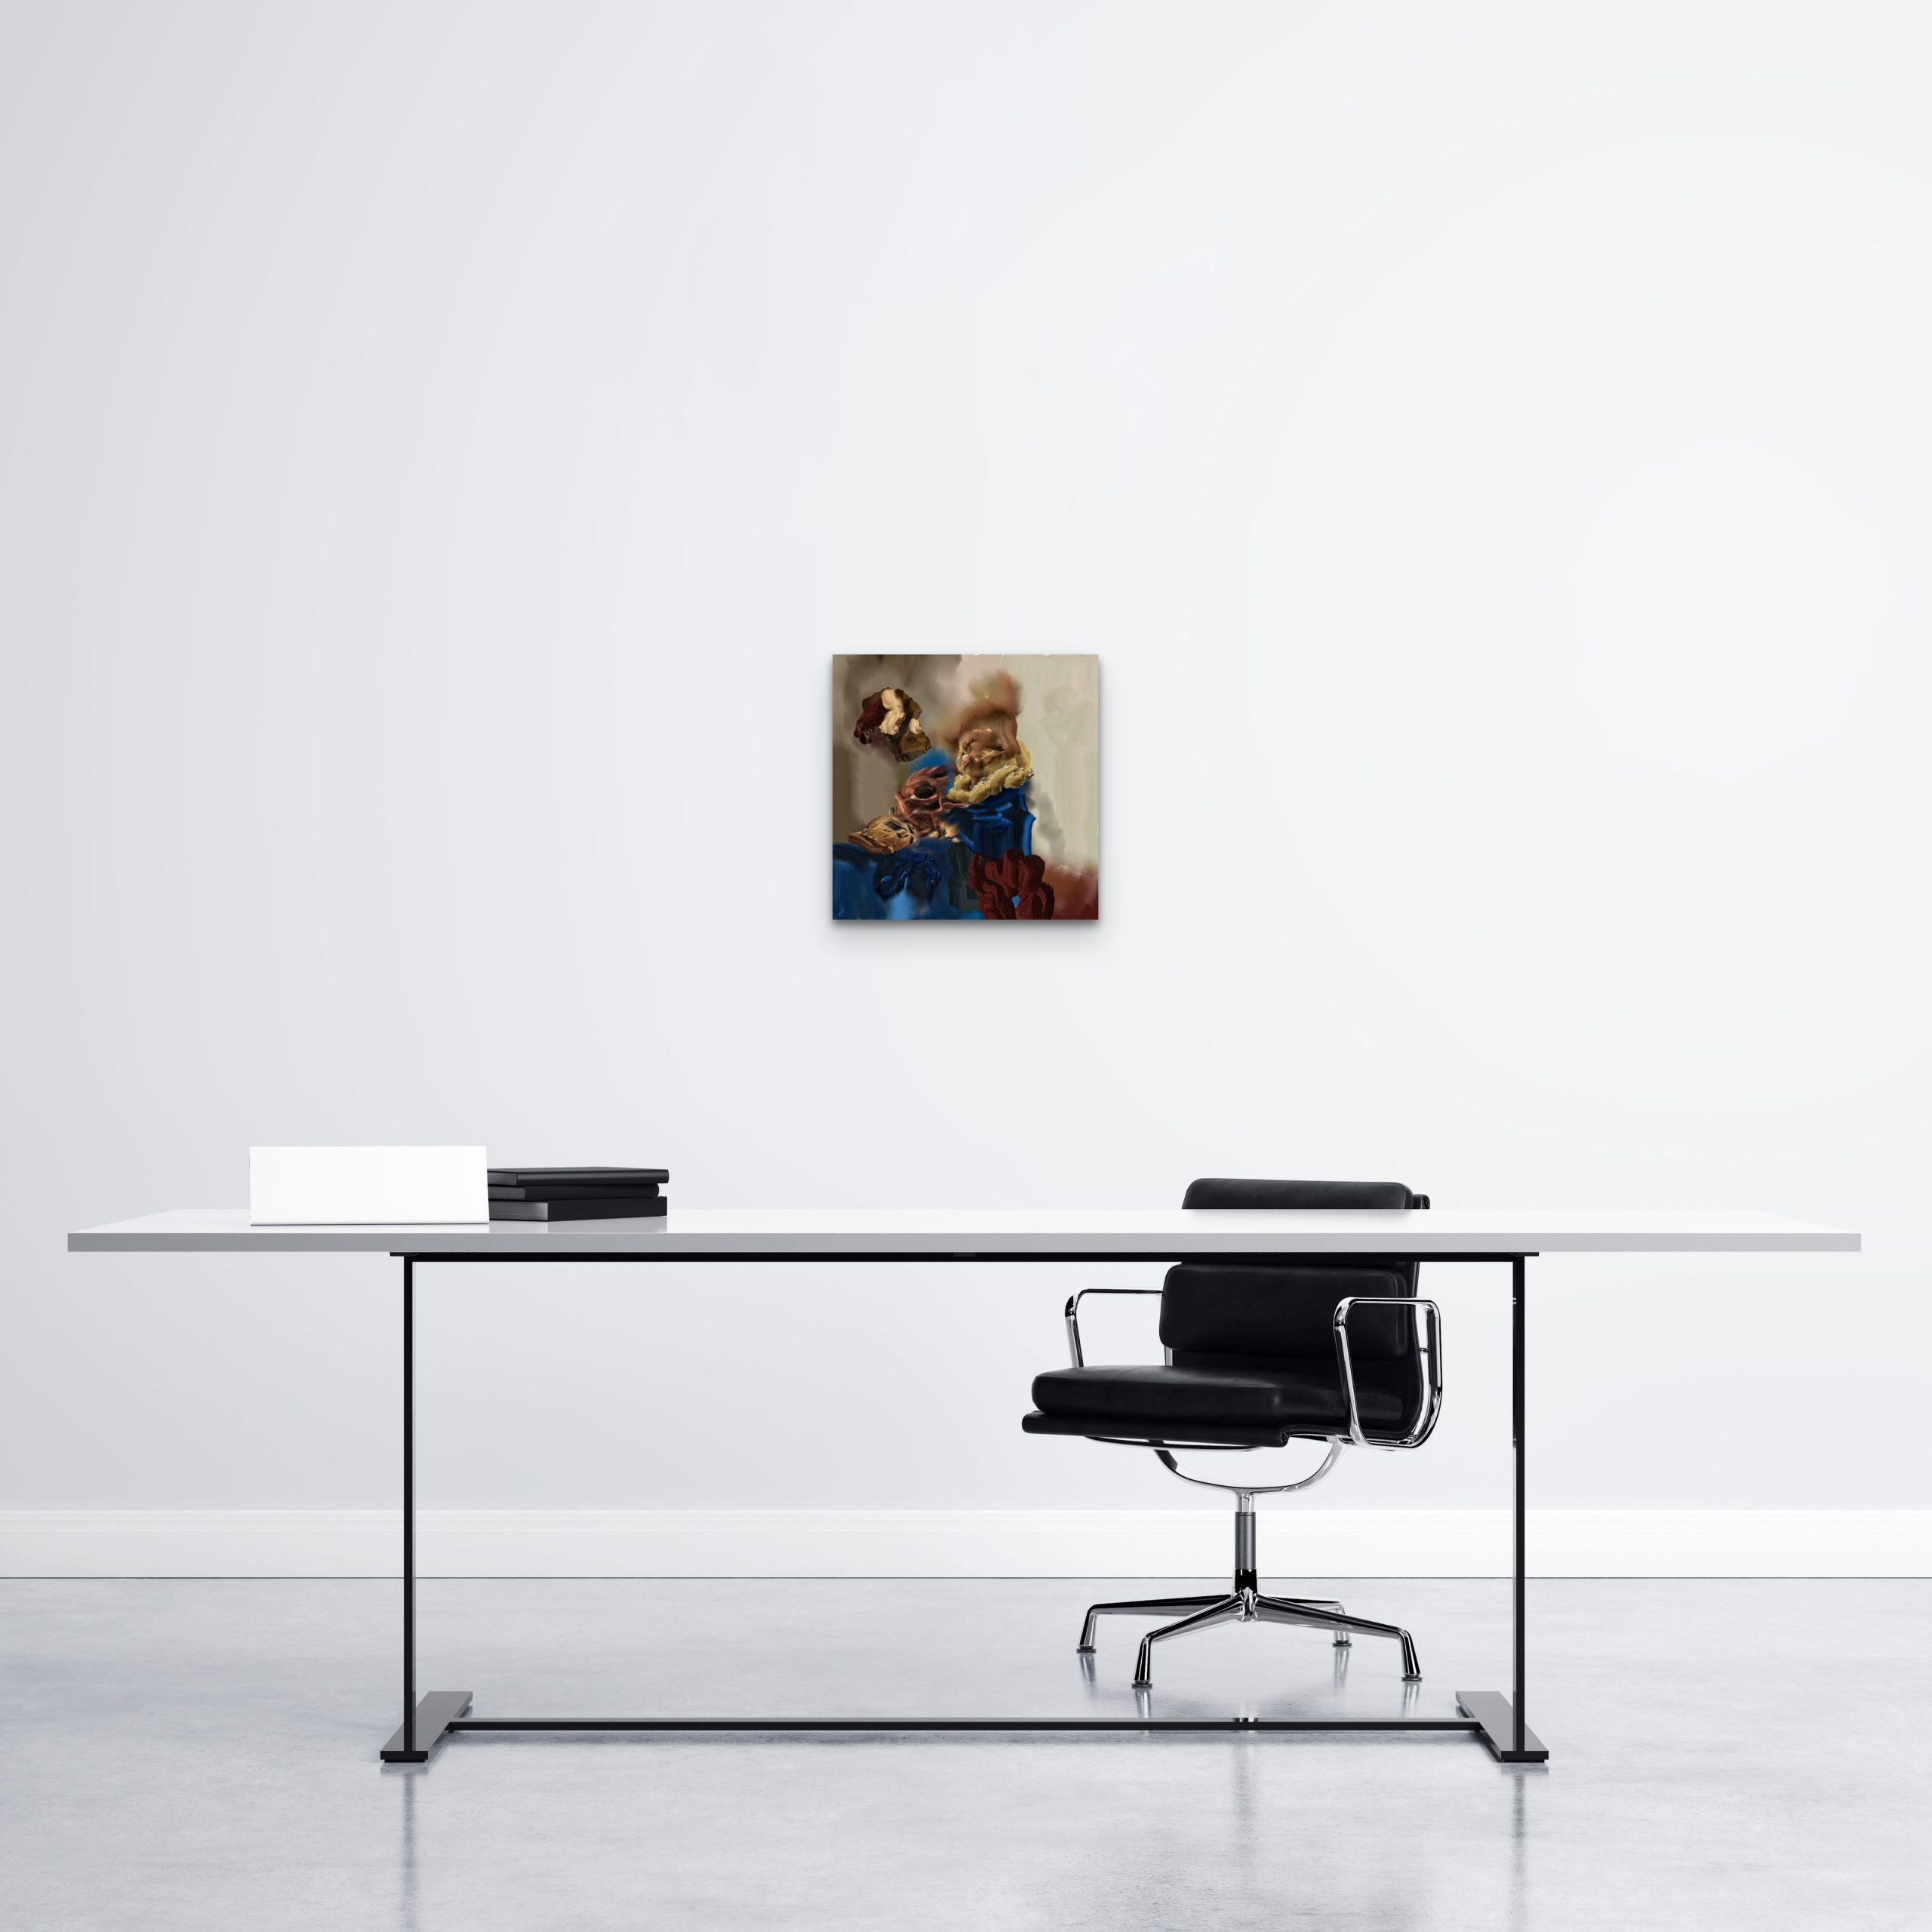 Digital Fragments 101: The Milmaid measuring 12 x 12 inches displayed in an office setting. 